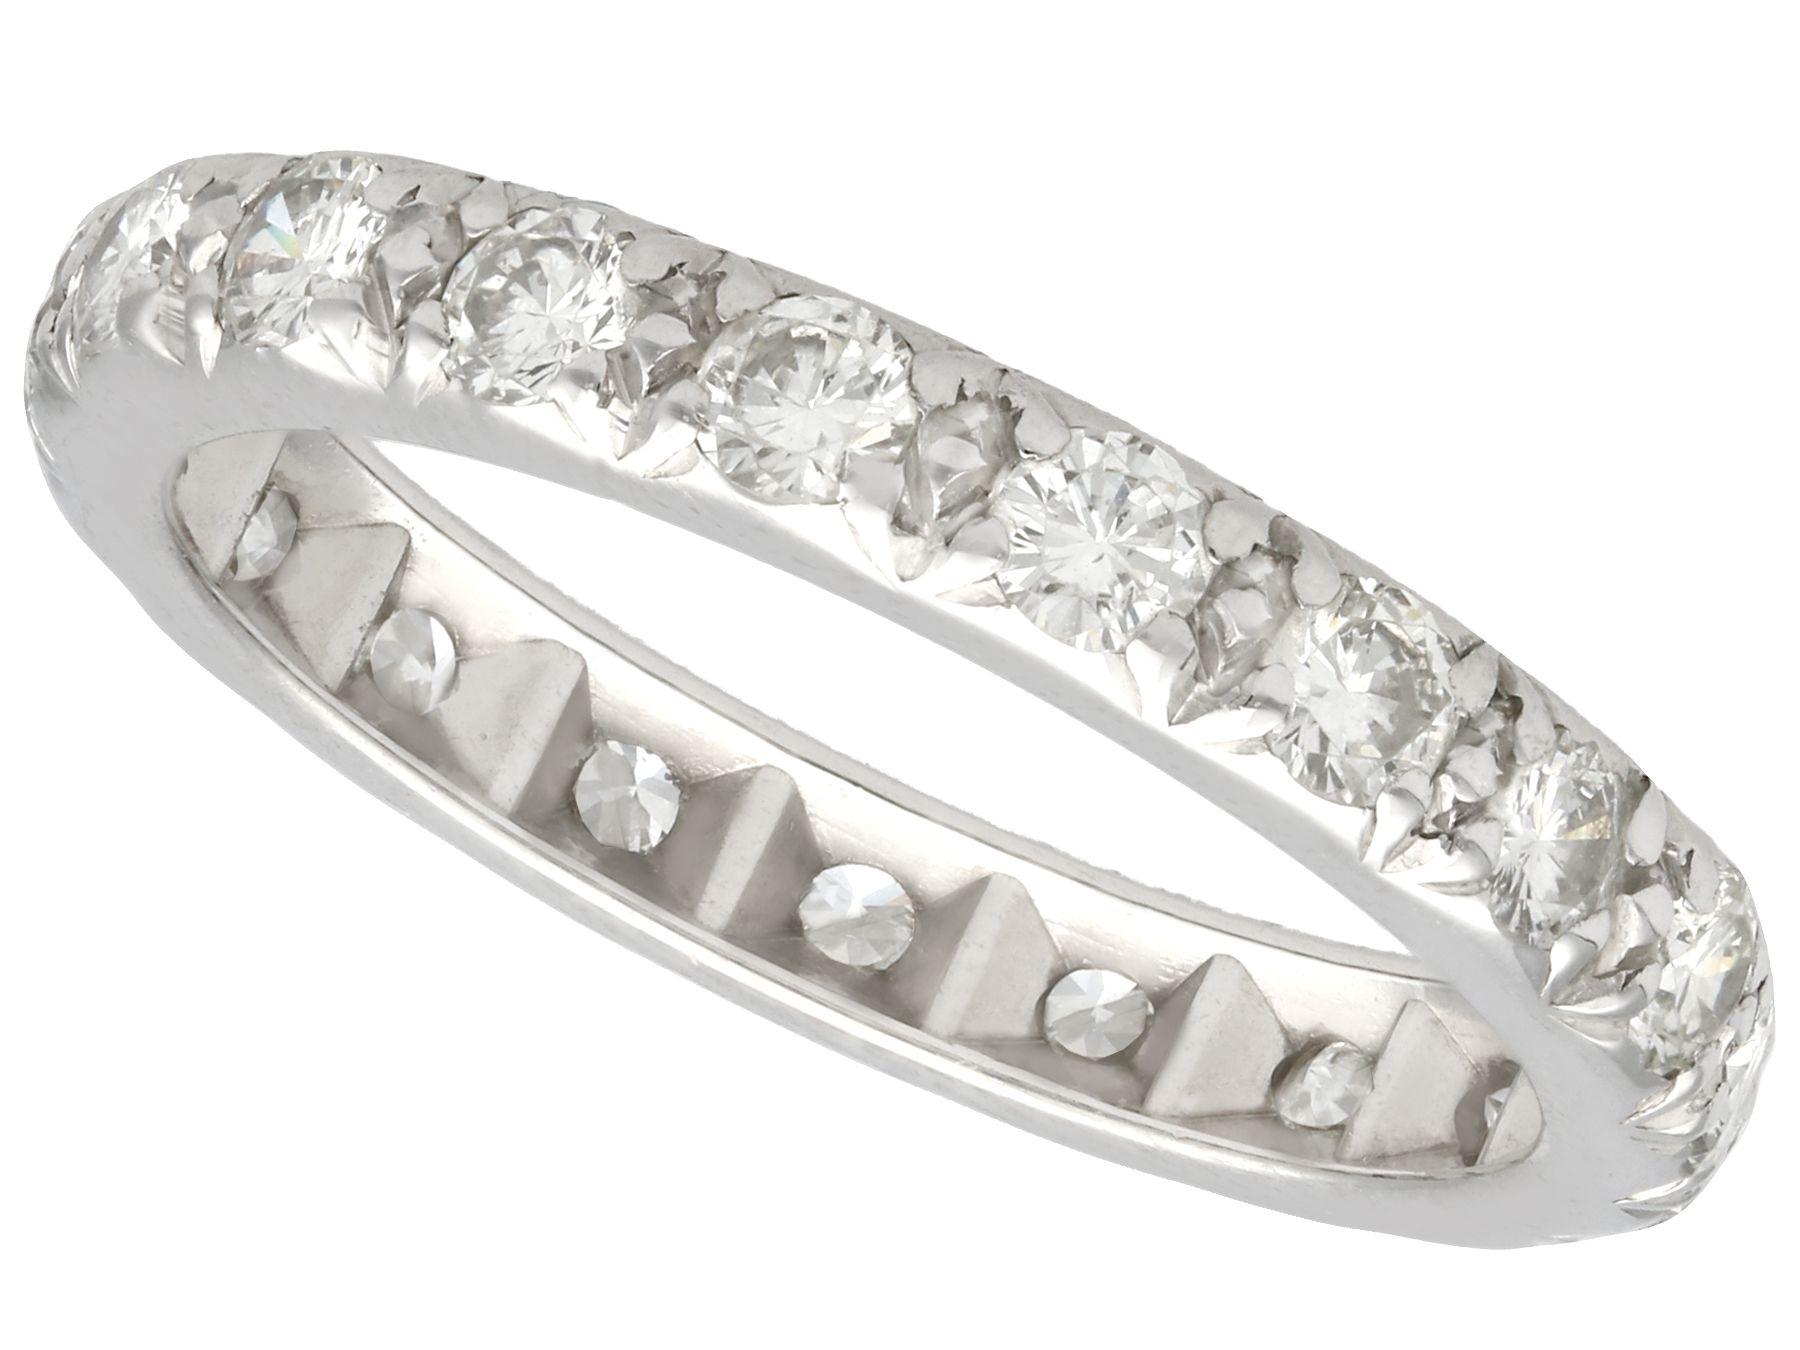 This fine and impressive vintage diamond eternity ring has been crafted in platinum.

The ring is embellished with twenty-five pavé set diamonds in a combination of Old European round and old mine cuts.

The eternity ring is plain and